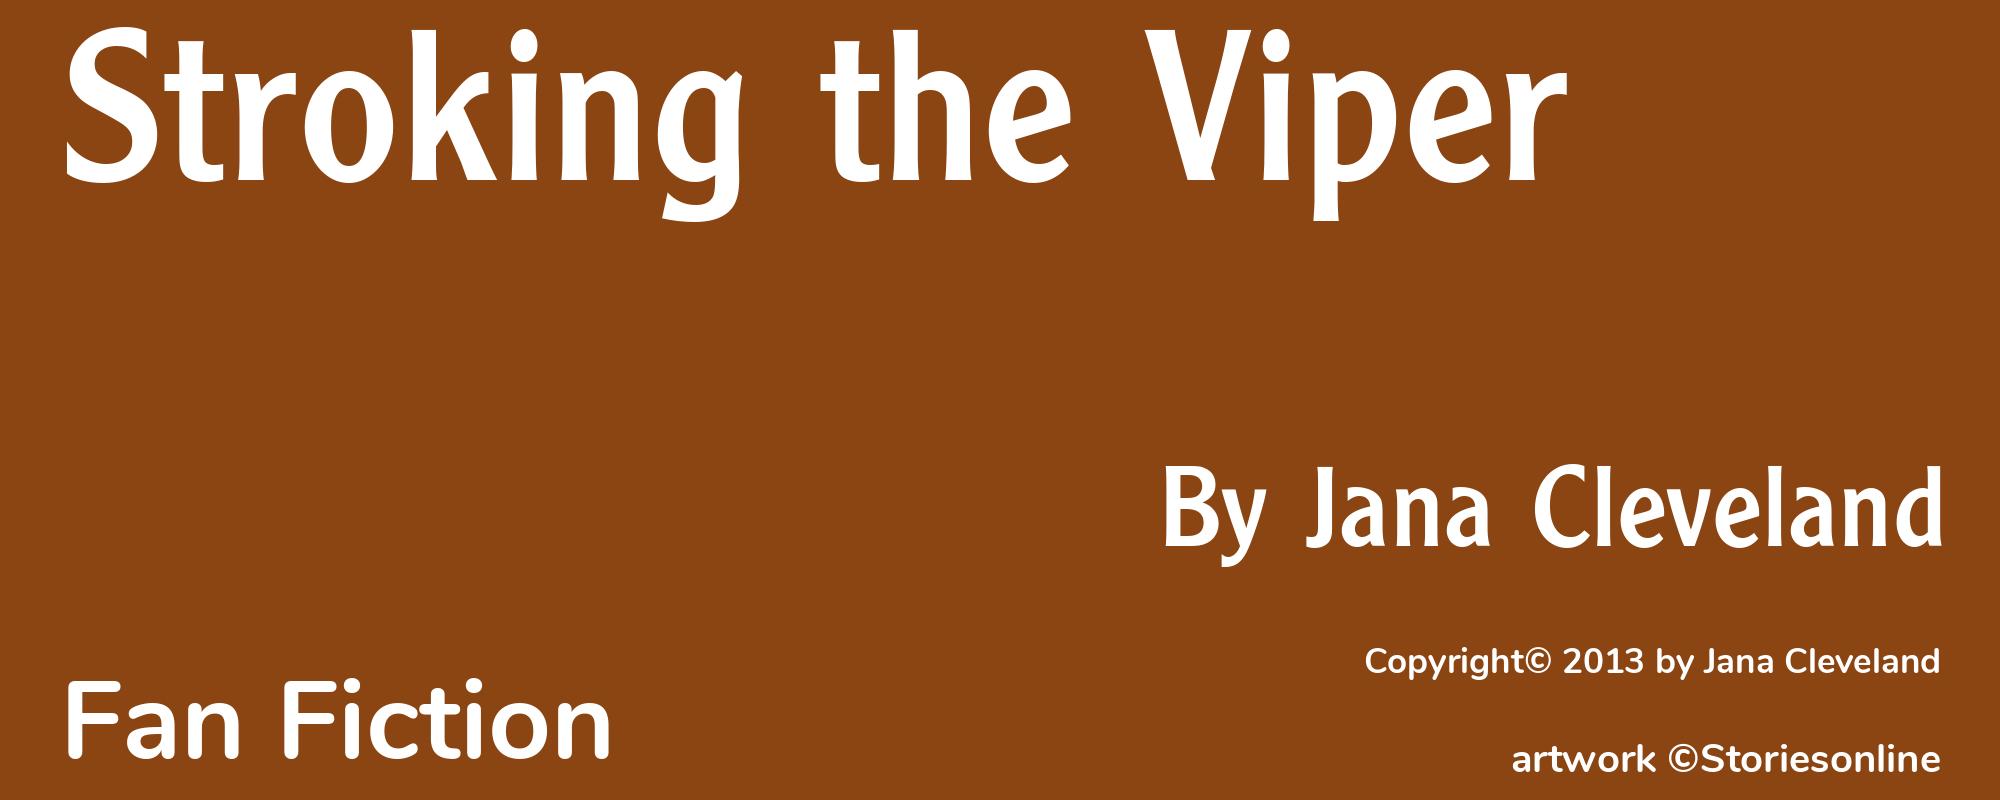 Stroking the Viper - Cover